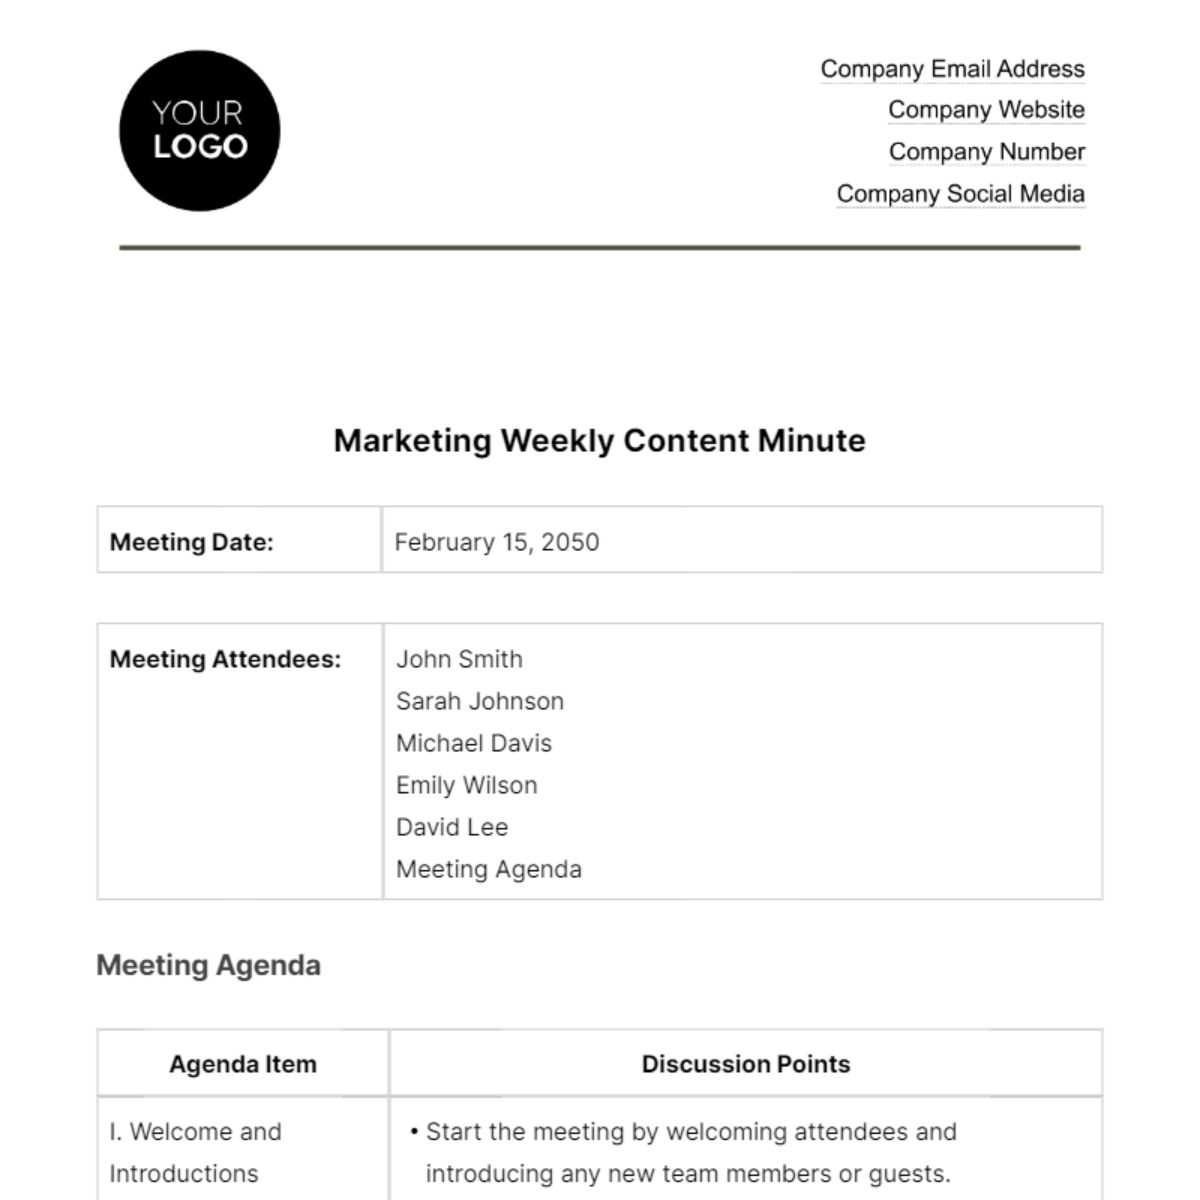 Marketing Weekly Content Minute Template